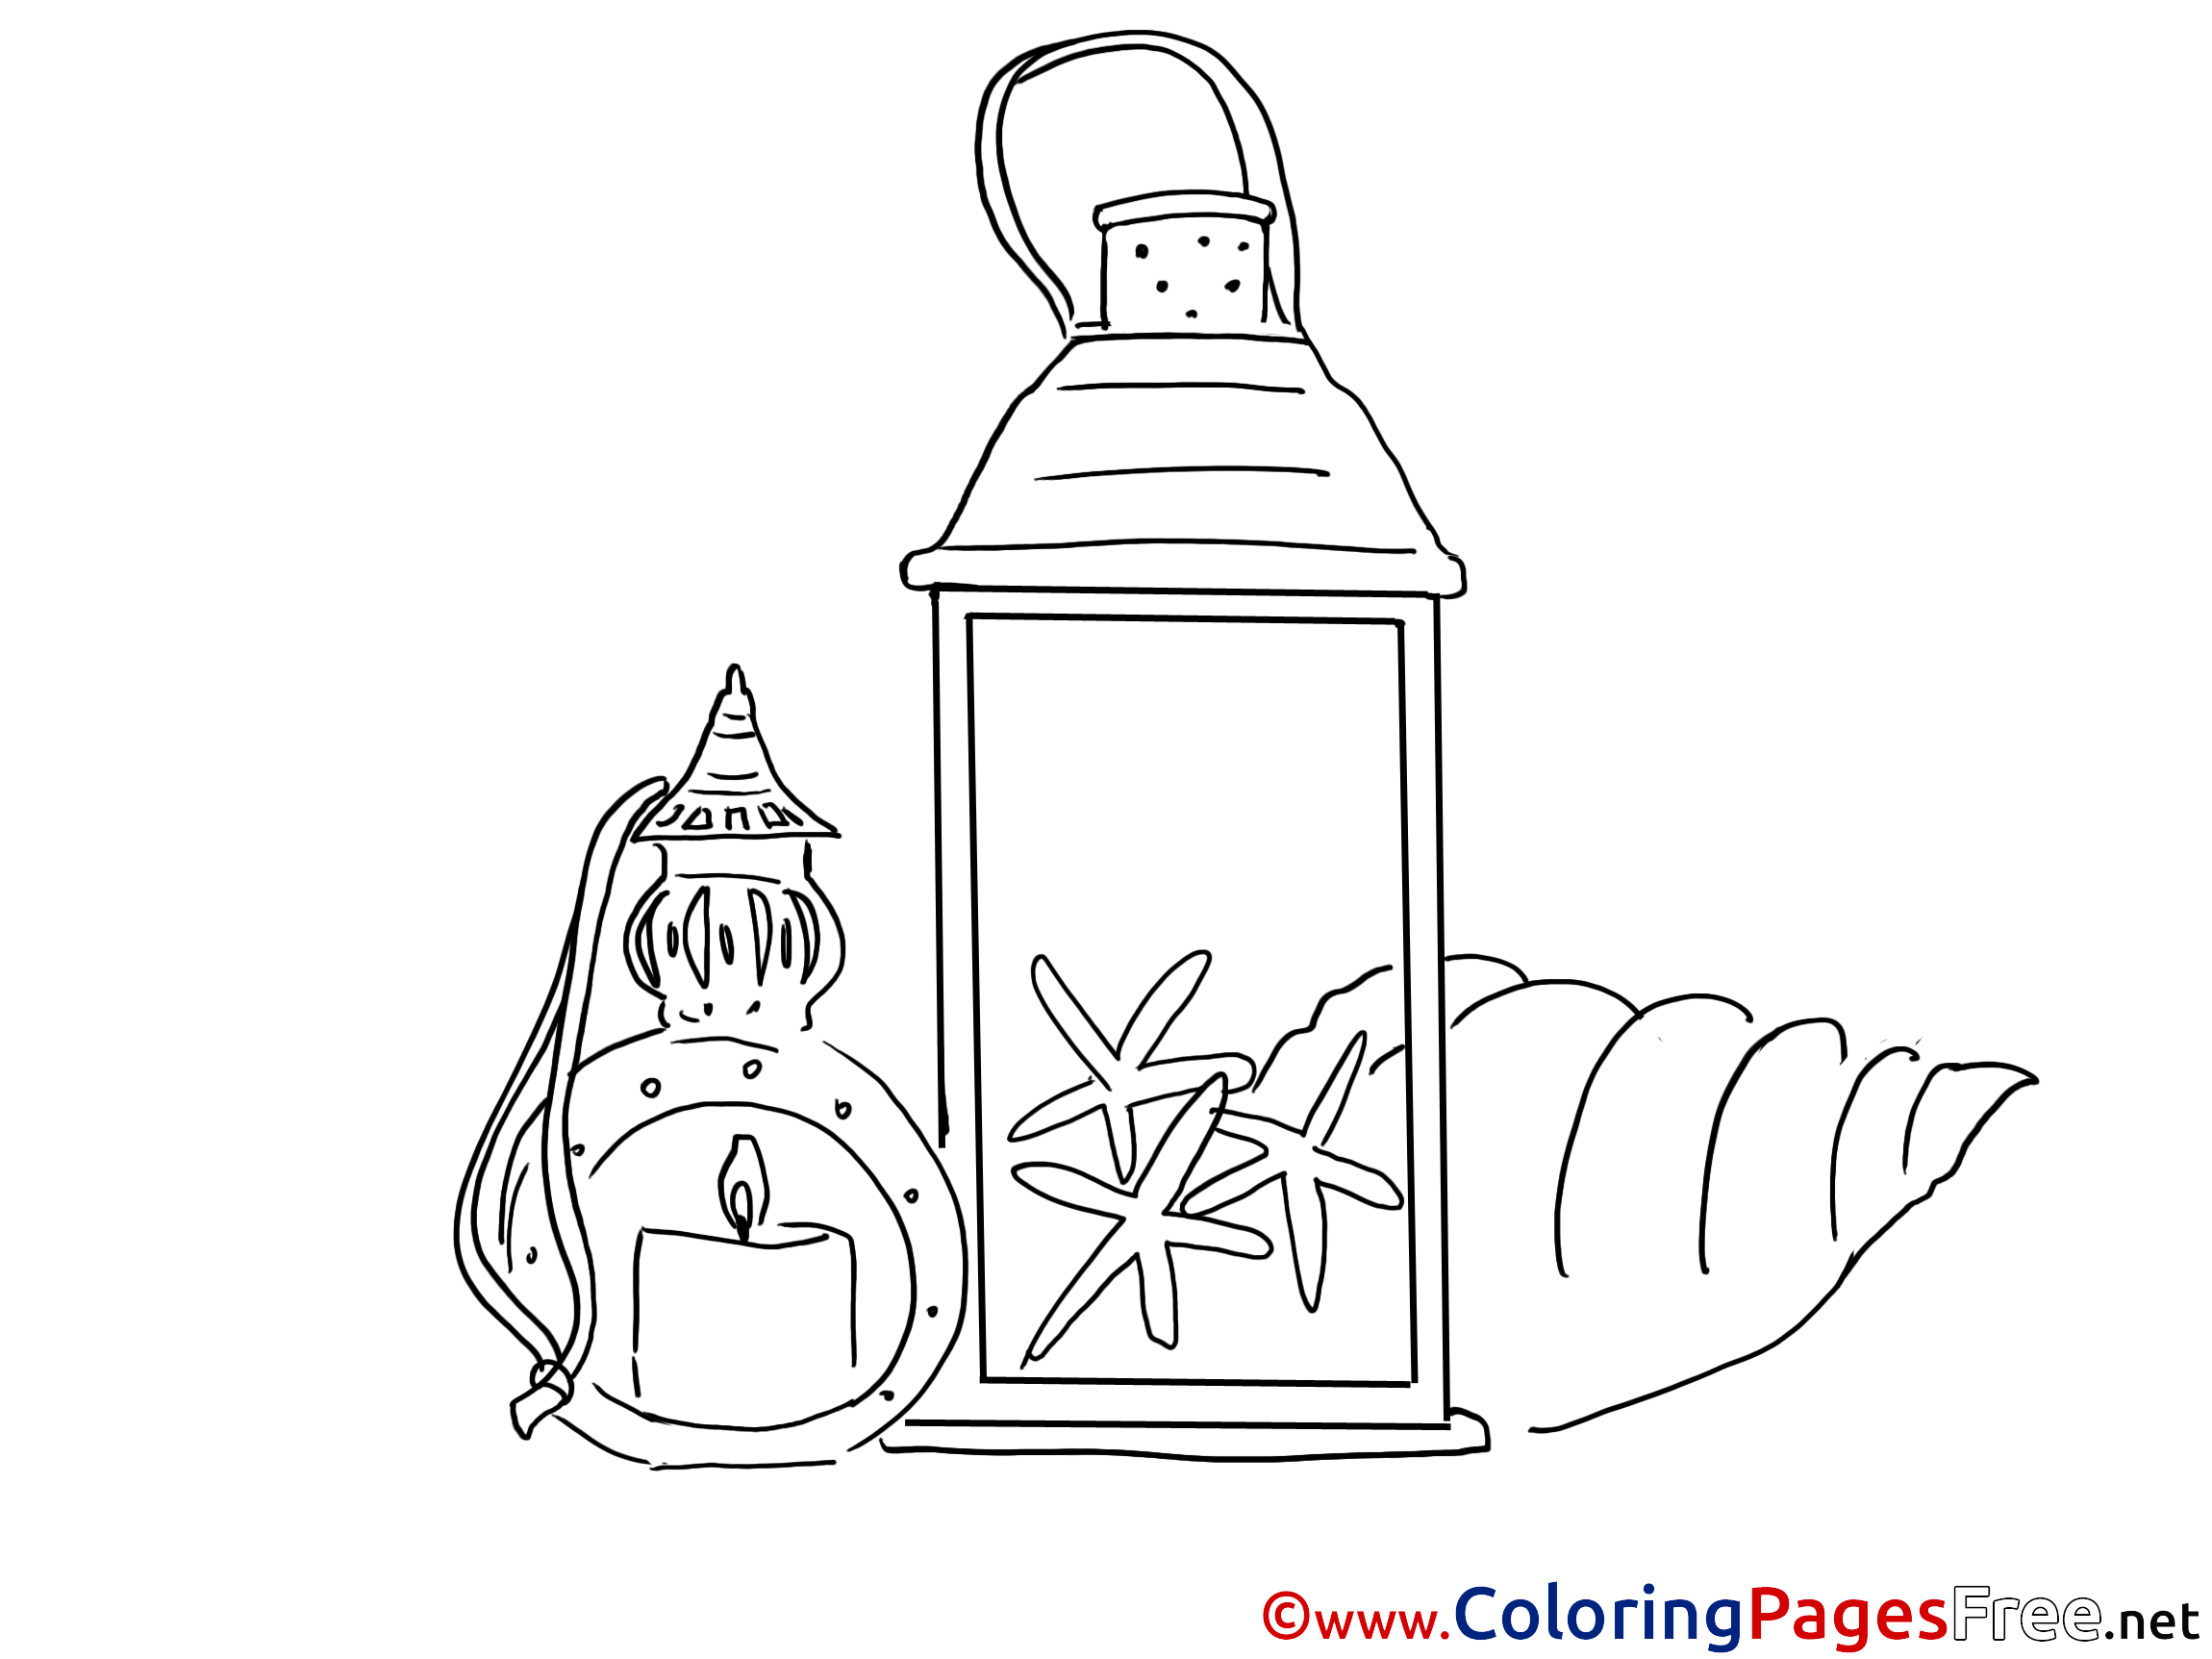 Lantern for free Coloring Pages download